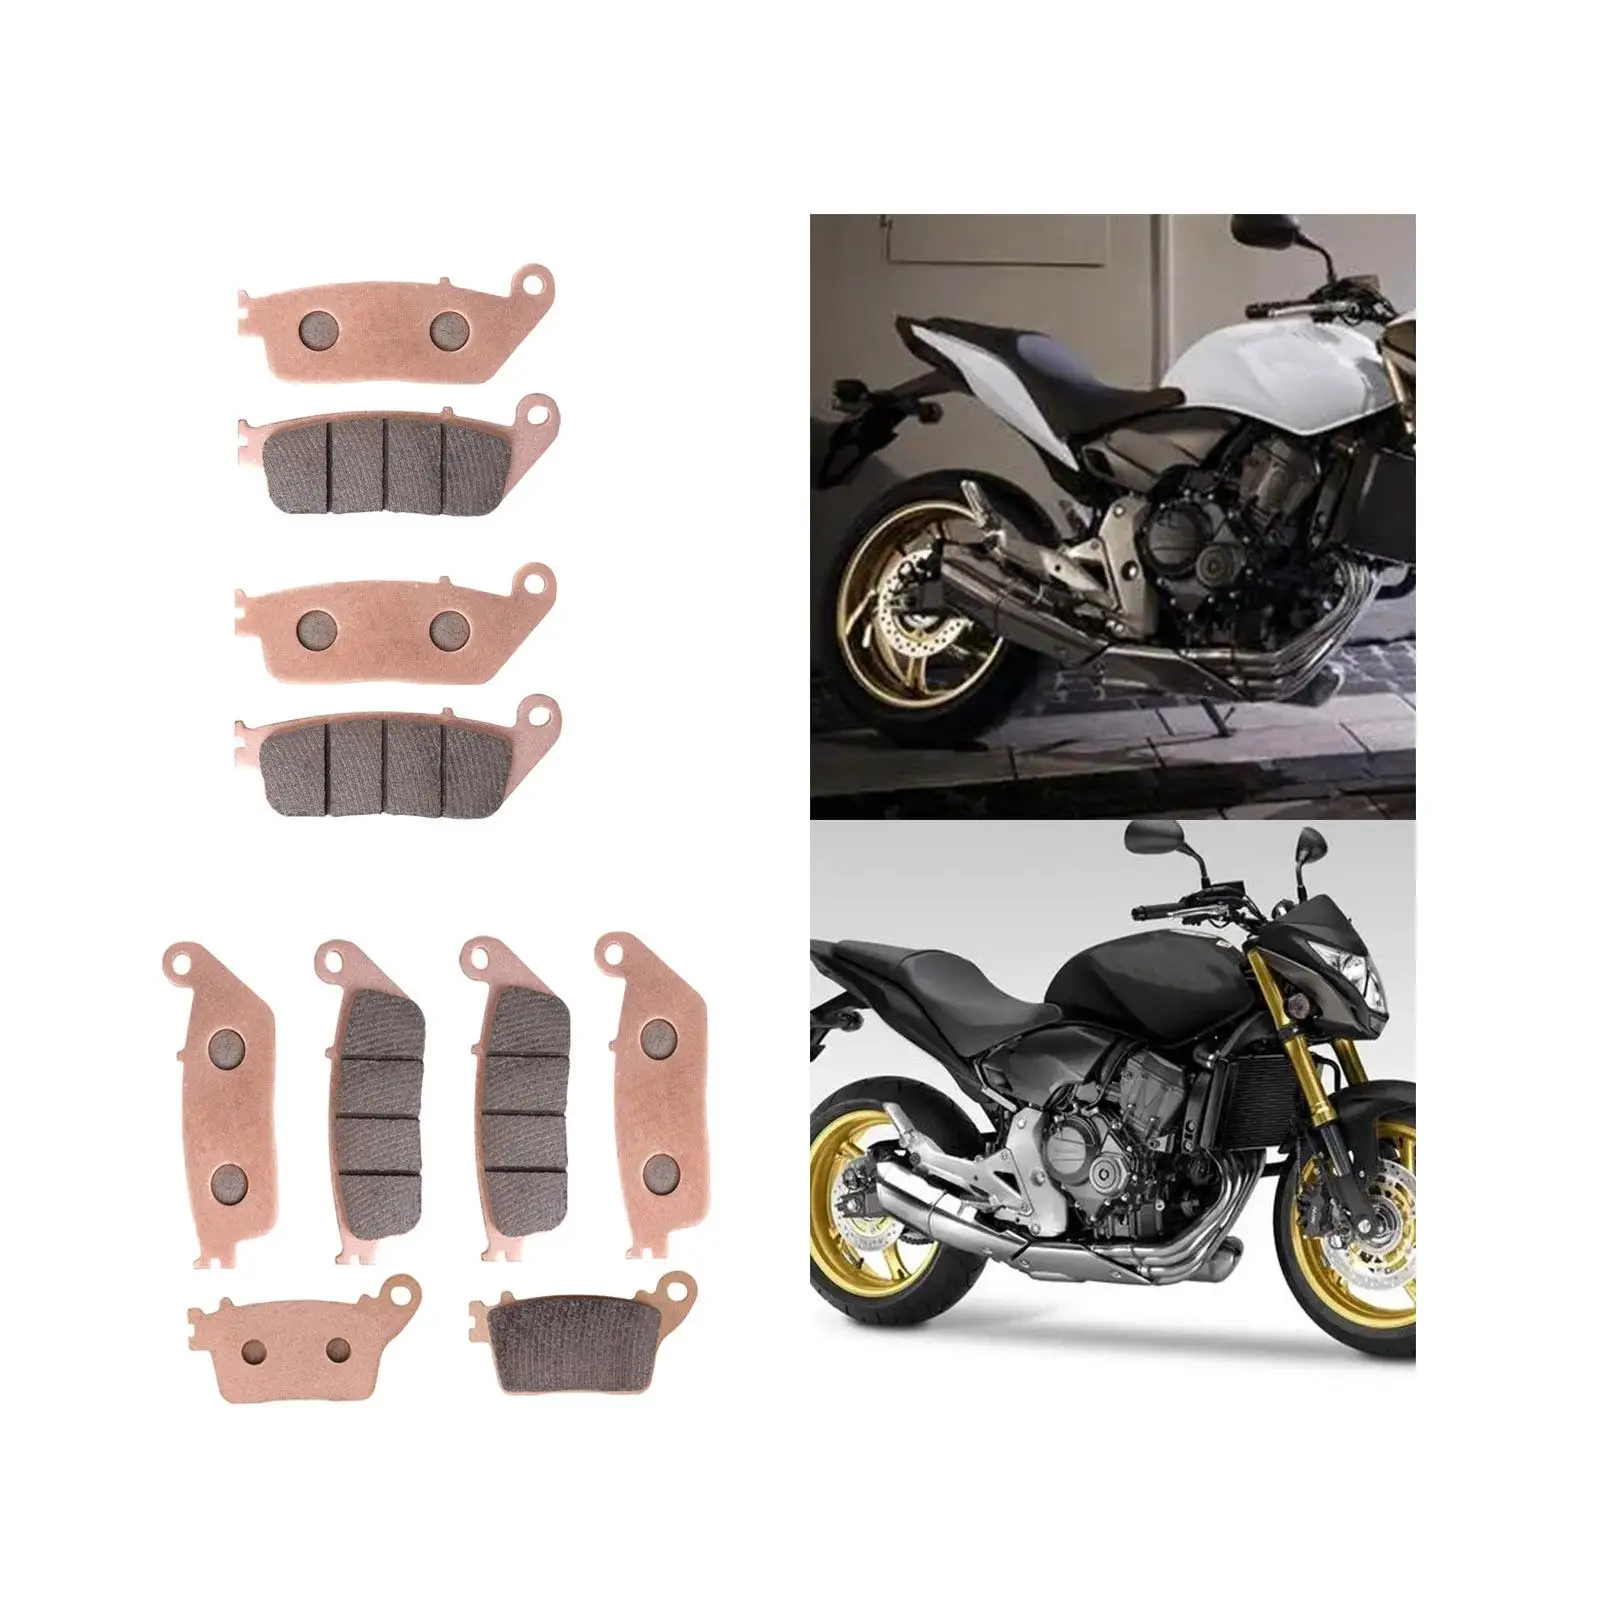 2 Pieces Brake Pads Accessories Brake Pads replacement of Honda CBR600 FB FC Hornet Easy to Install Quality